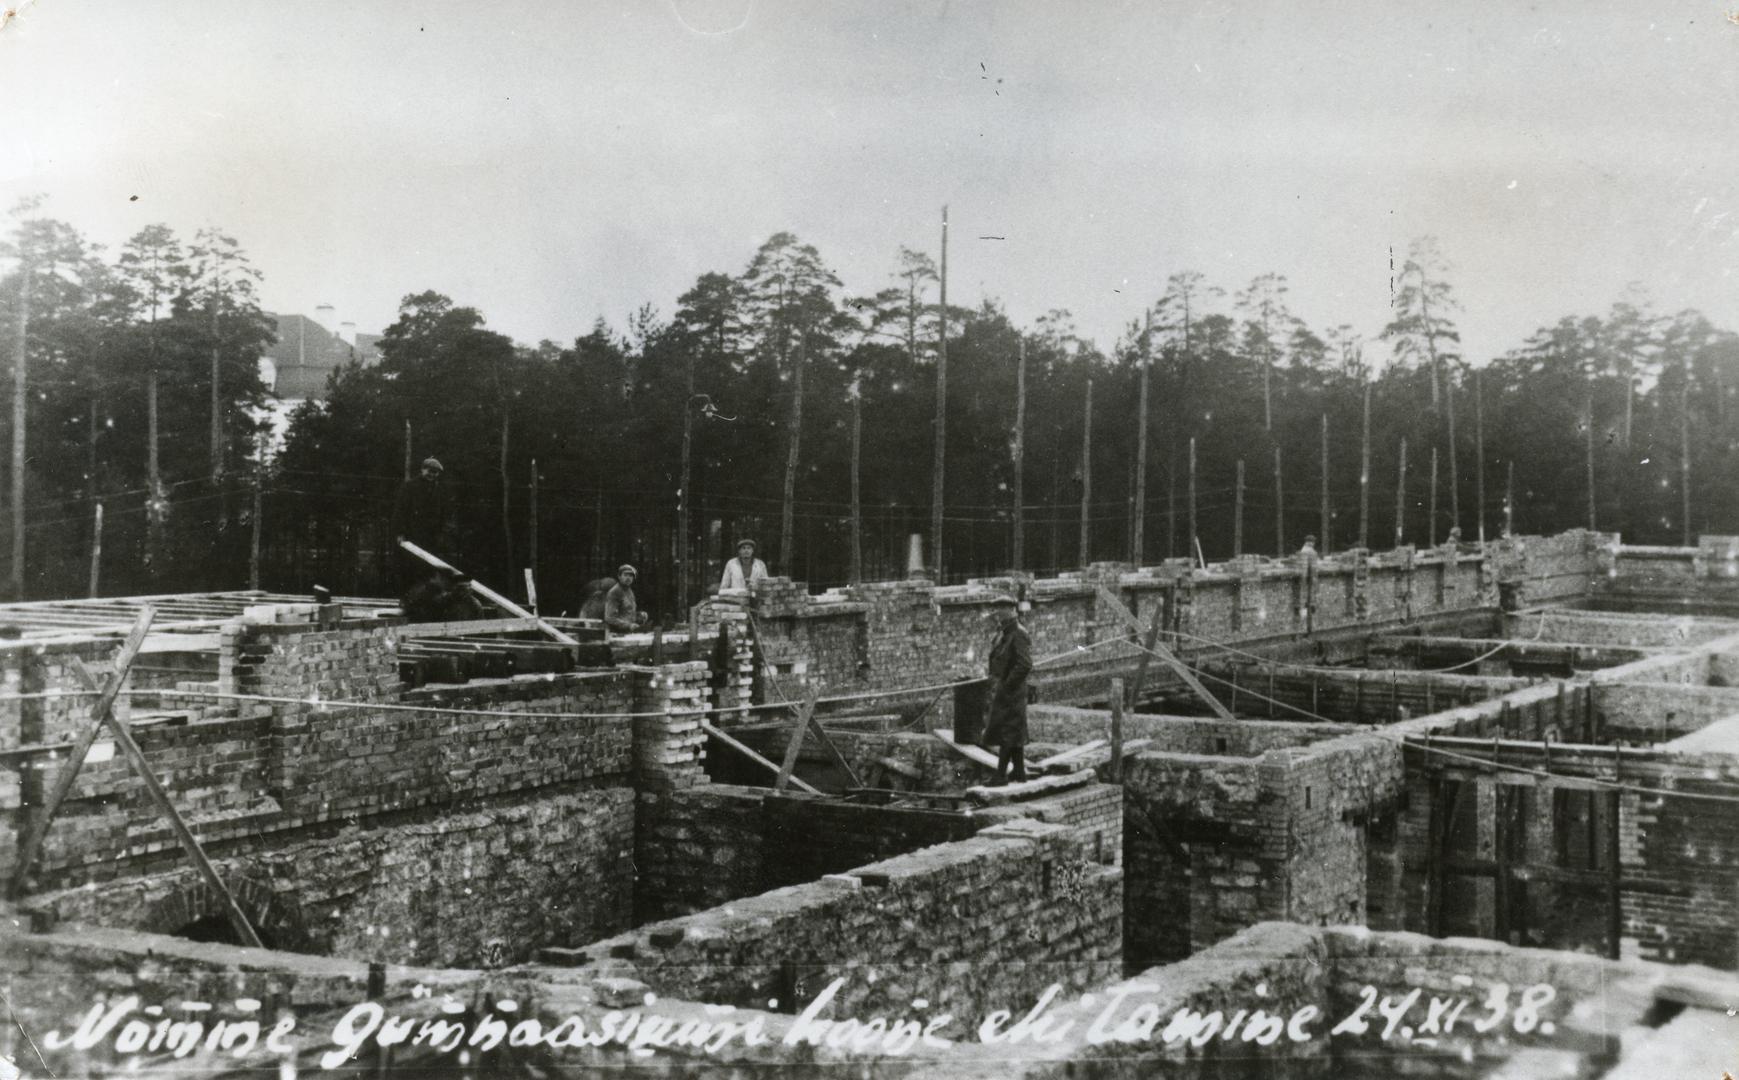 Construction of the new building of Nõmme Gymnasium